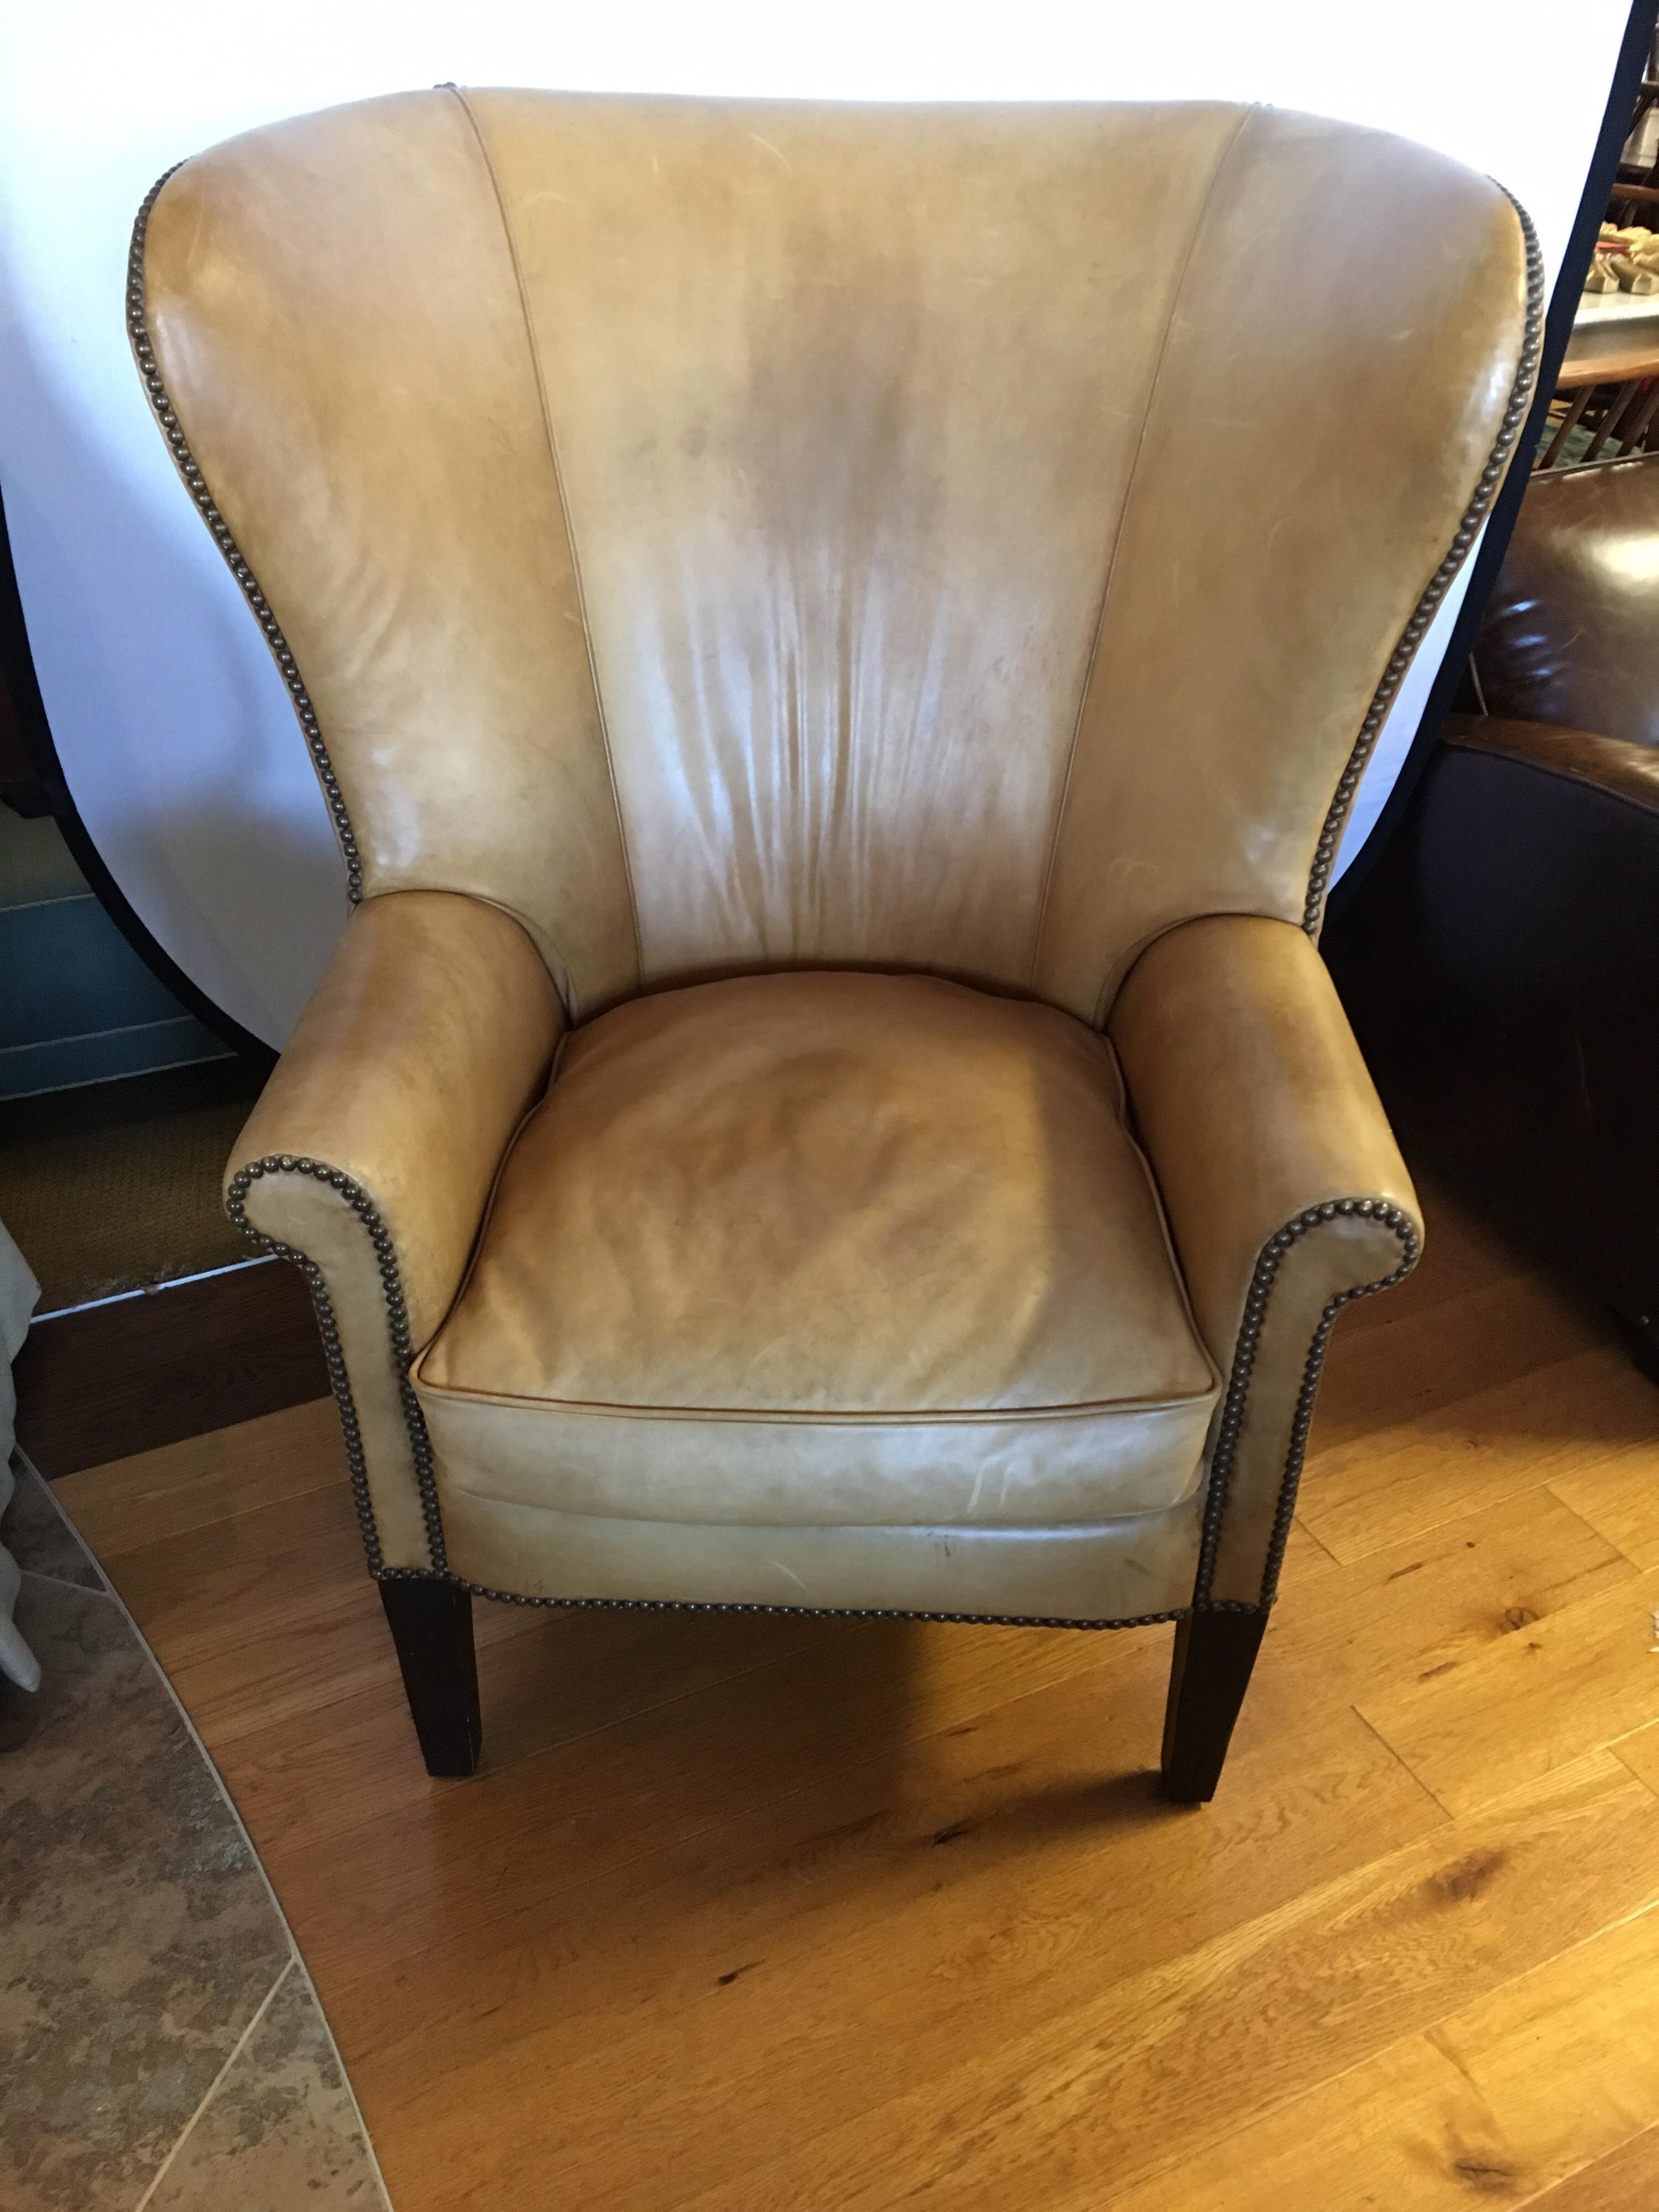 Stunning vintage Ralph Lauren large leather and nailhead wingback chair with a most unusual, and sought after back (see pictures attached). Leather is broken in perfectly and color is a dark beige.